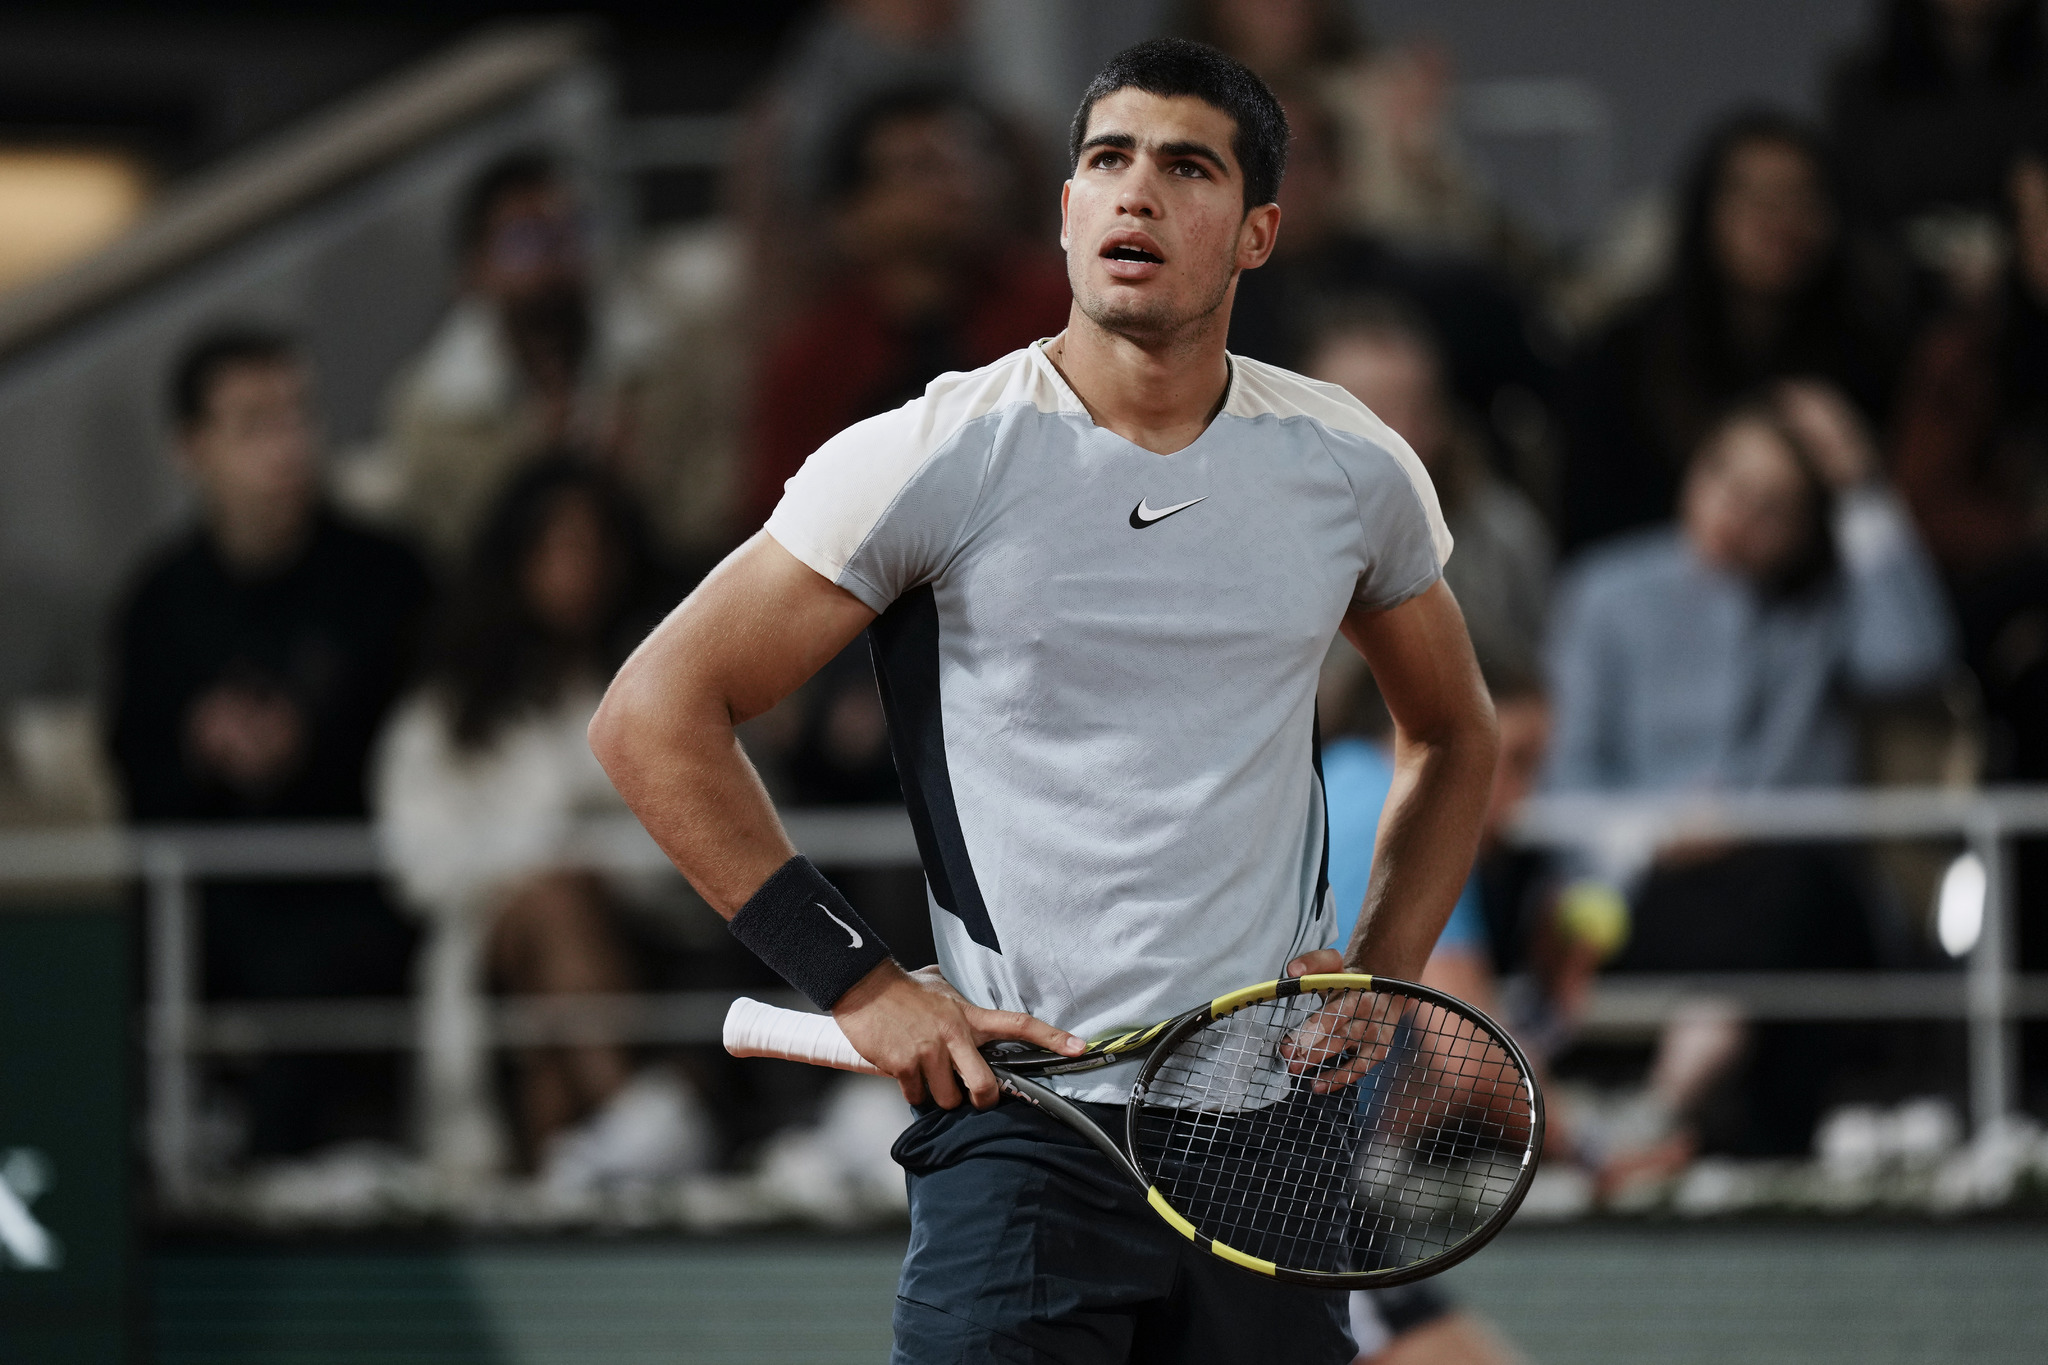 Spain's Carlos Alcaraz reacts after missing a shot against Russia's Karen  lt;HIT gt;Khachanov lt;/HIT gt; during their fourth round match at the French Open tennis tournament in Roland Garros stadium in Paris, France, Sunday, May 29, 2022. (AP Photo/Thibault Camus)